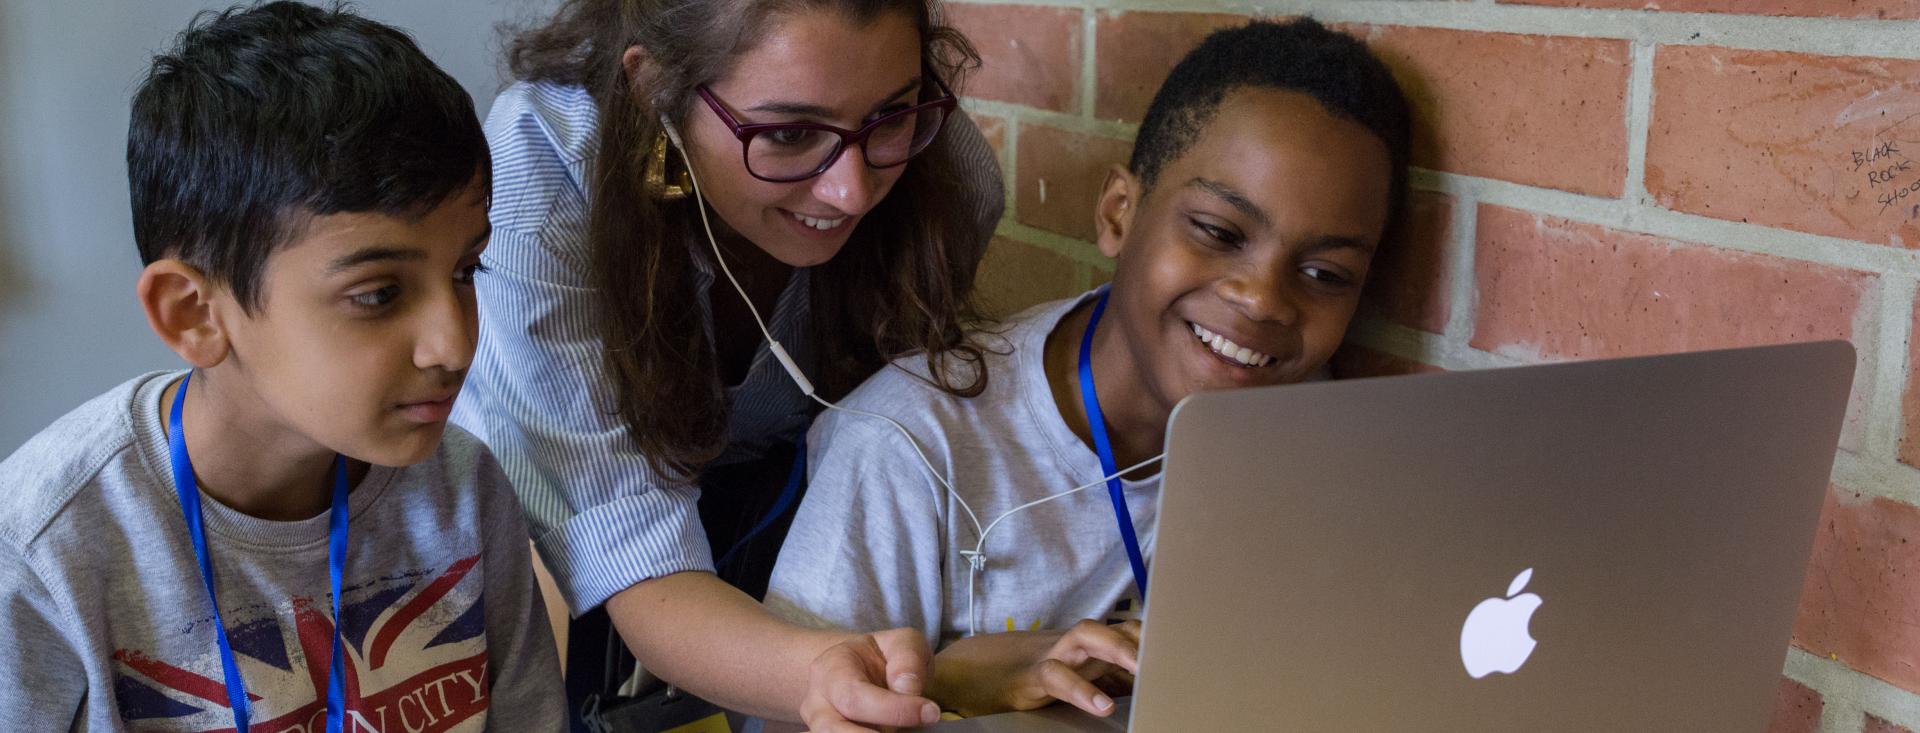 A young woman leans over two boys who are using a Macbook